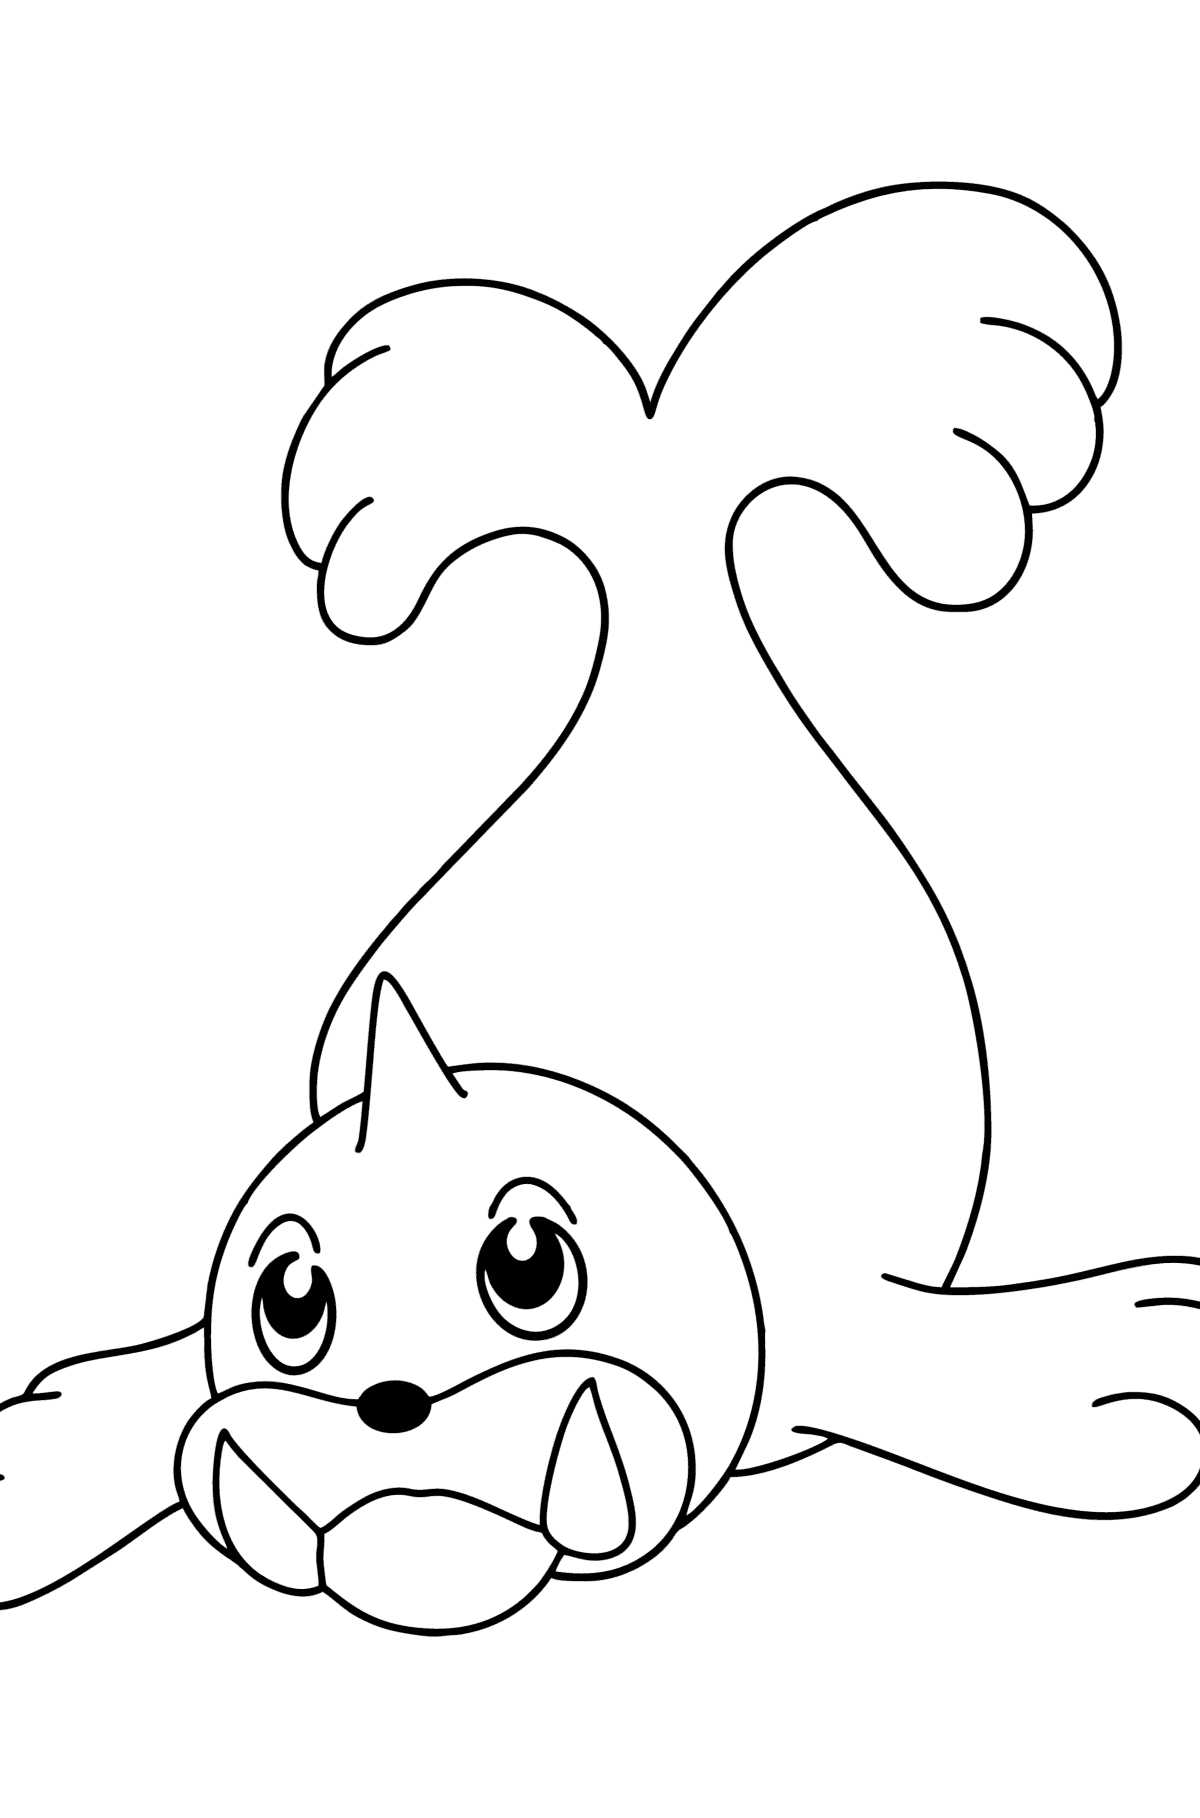 Coloring page Pokémon Go Seel - Coloring Pages for Kids